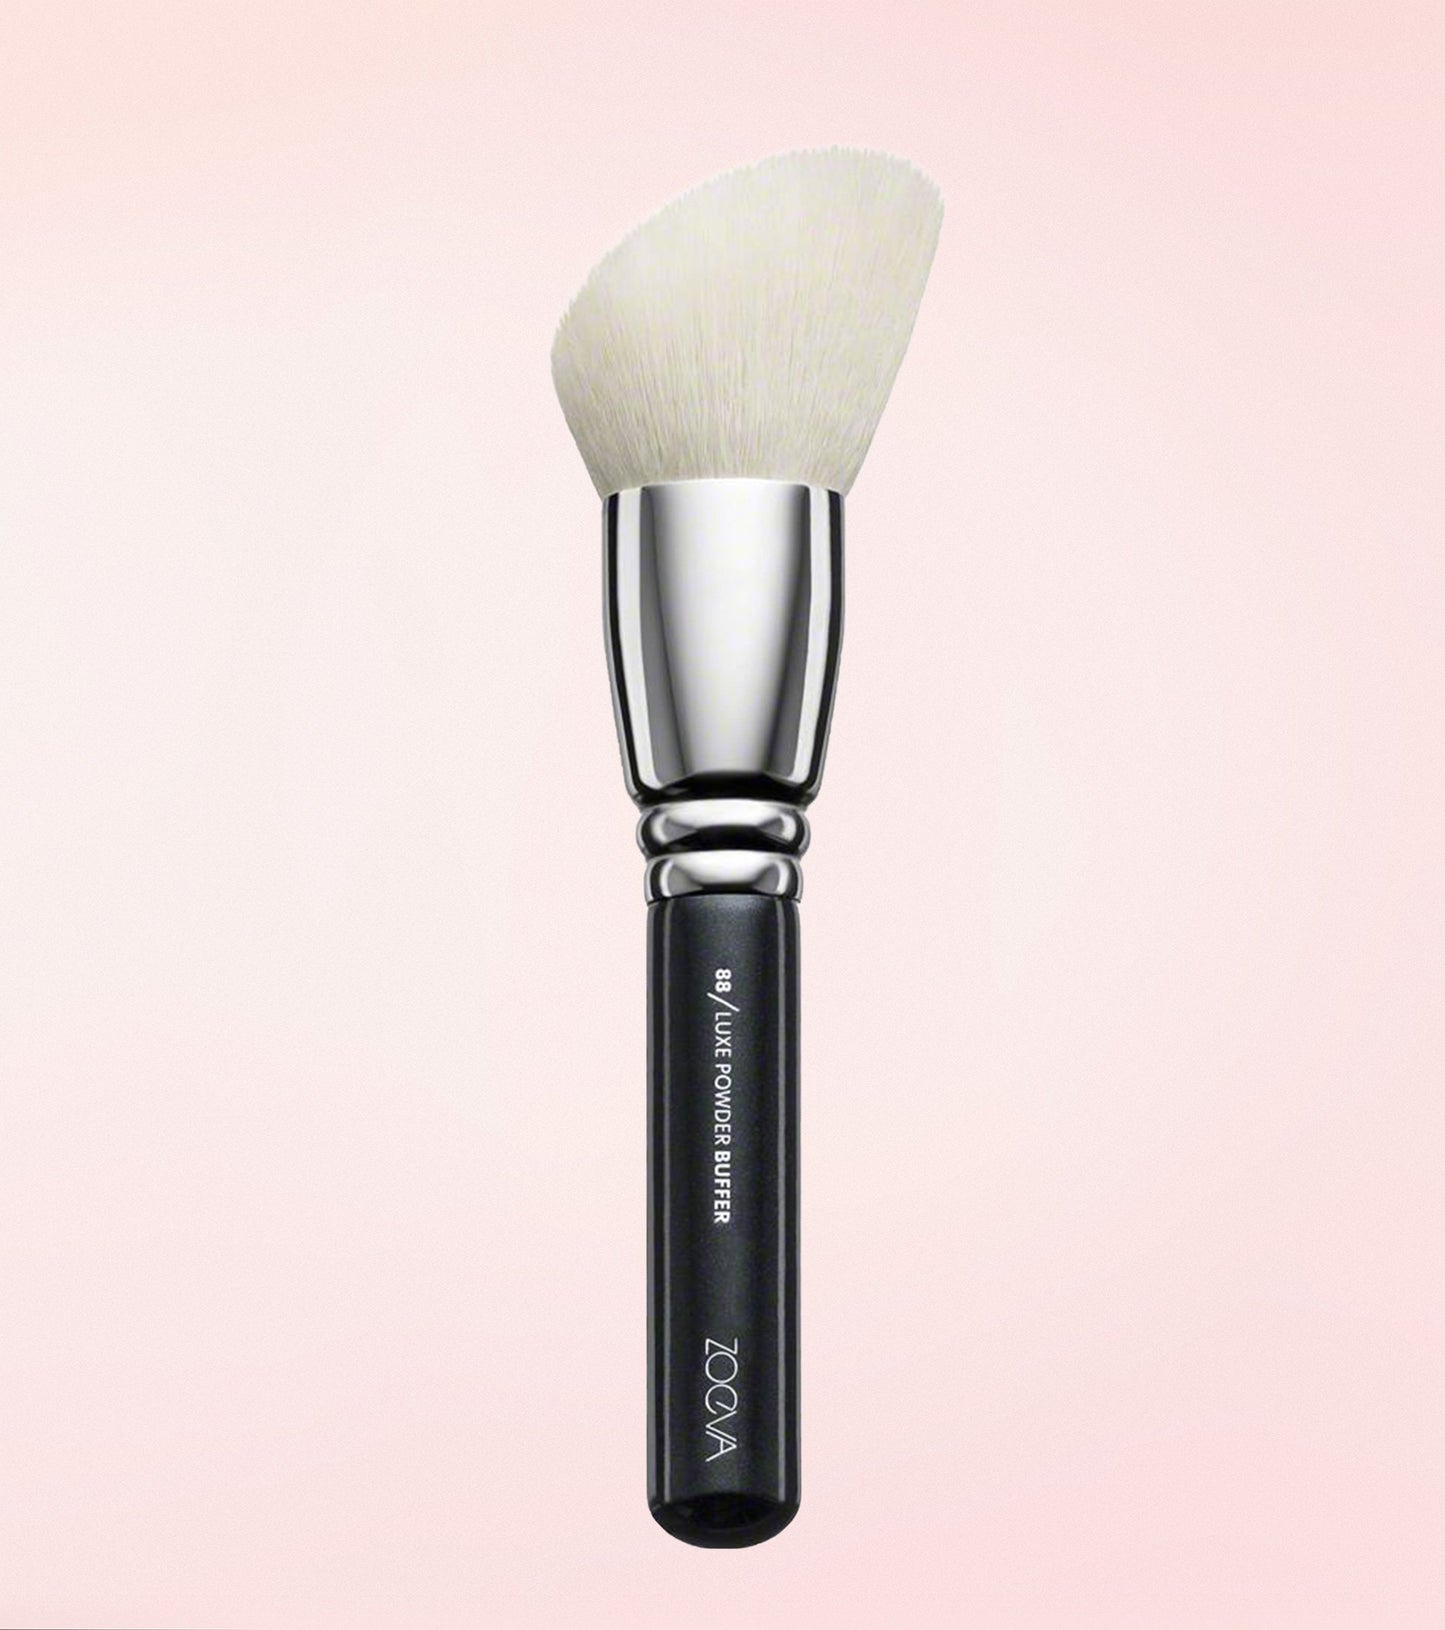 088 Luxe Powder Buffer Brush GIFT Expanded Image 1